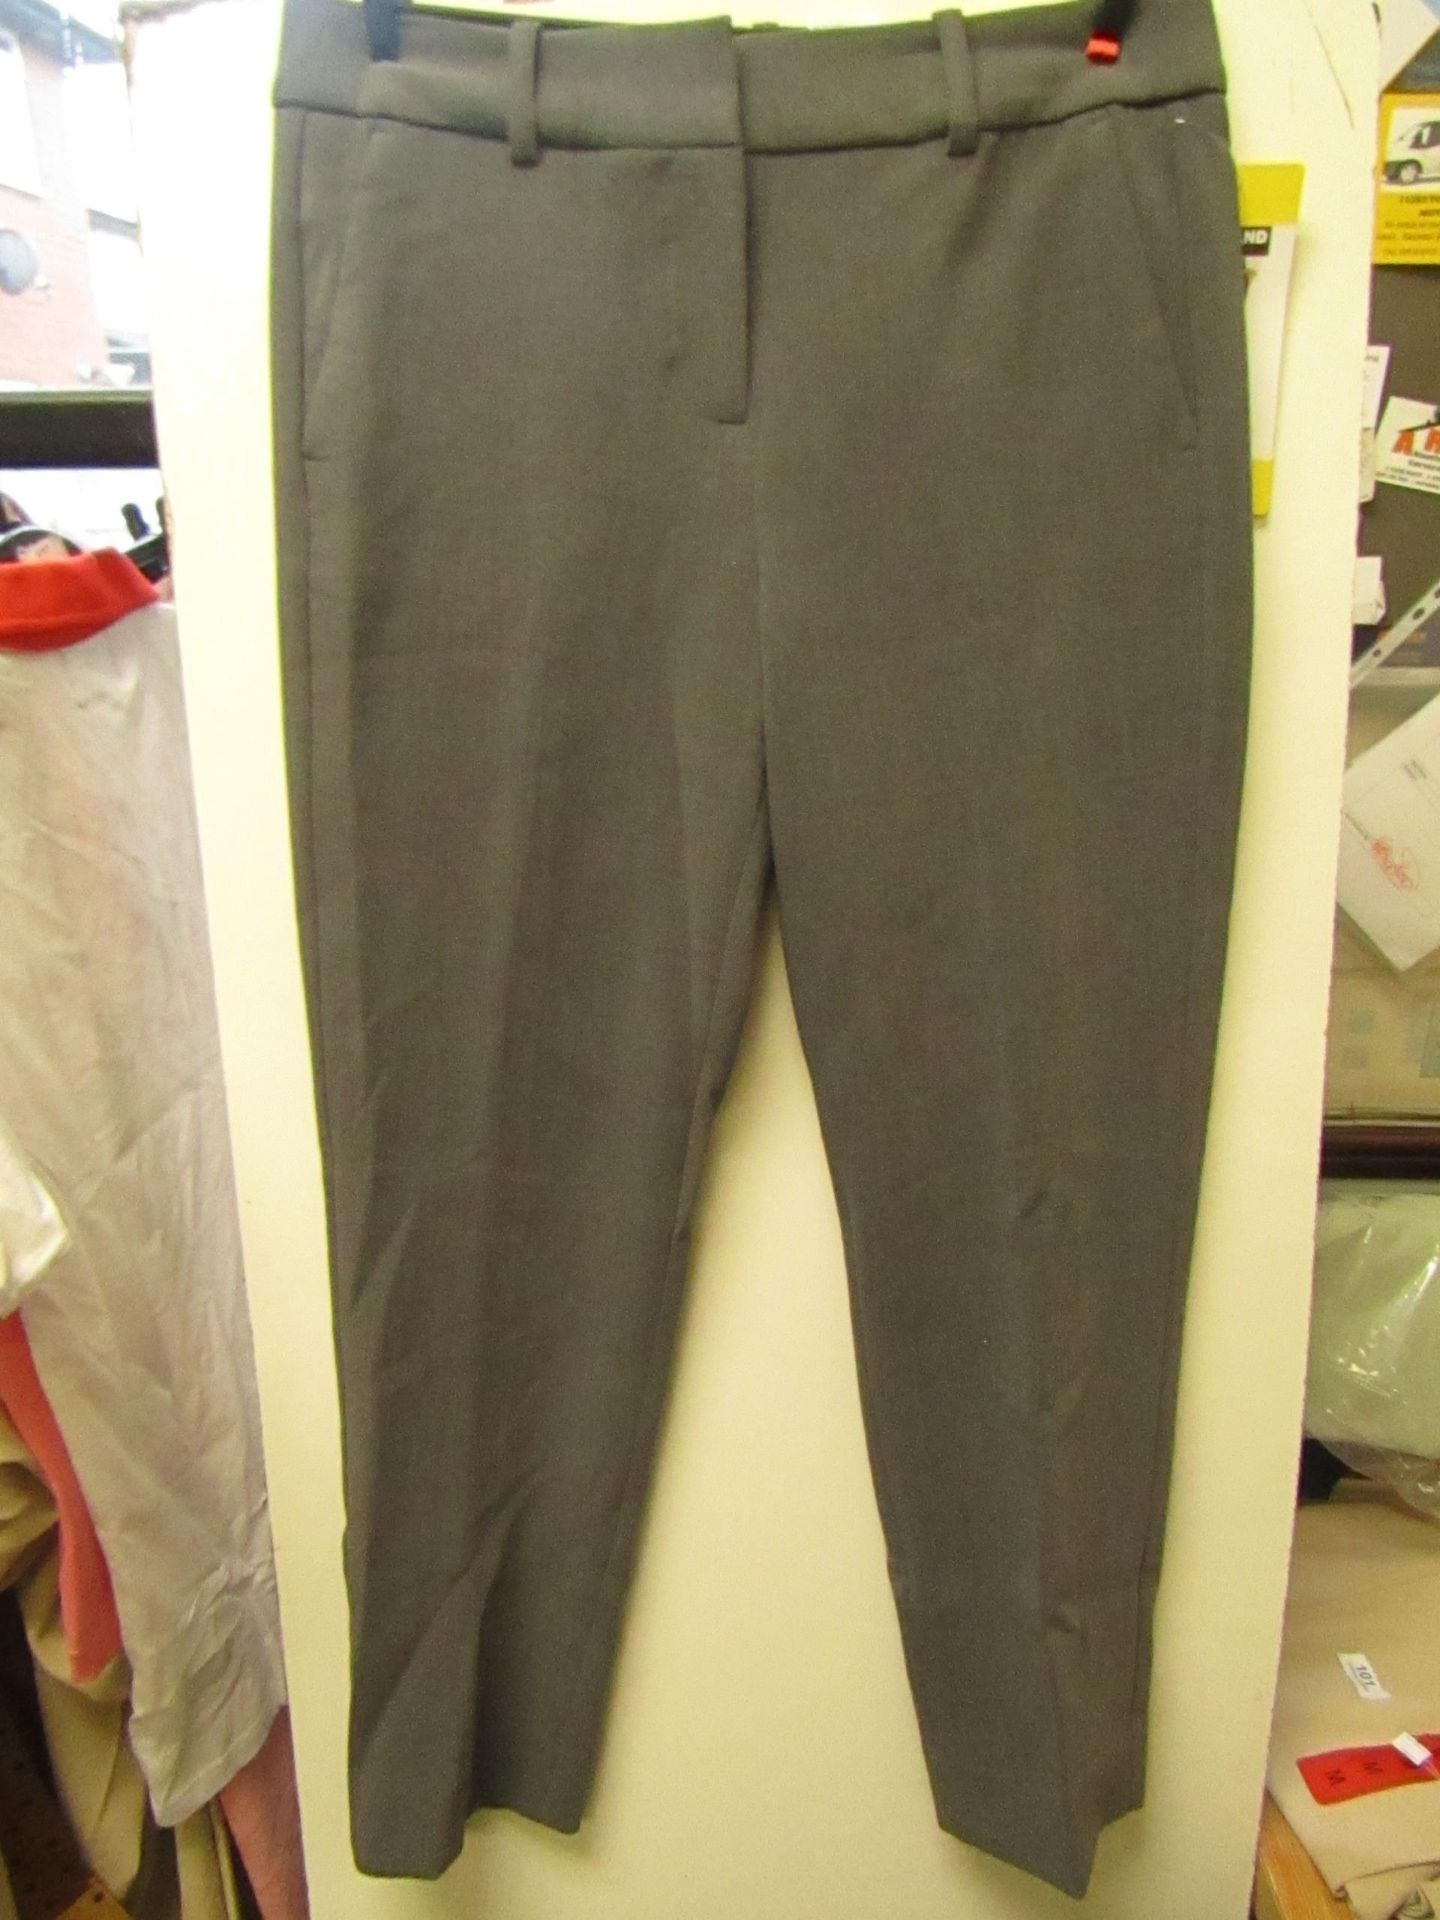 Kirkland Signature Ladies Pants Grey Size 6, 27 " Inseam New With Tags